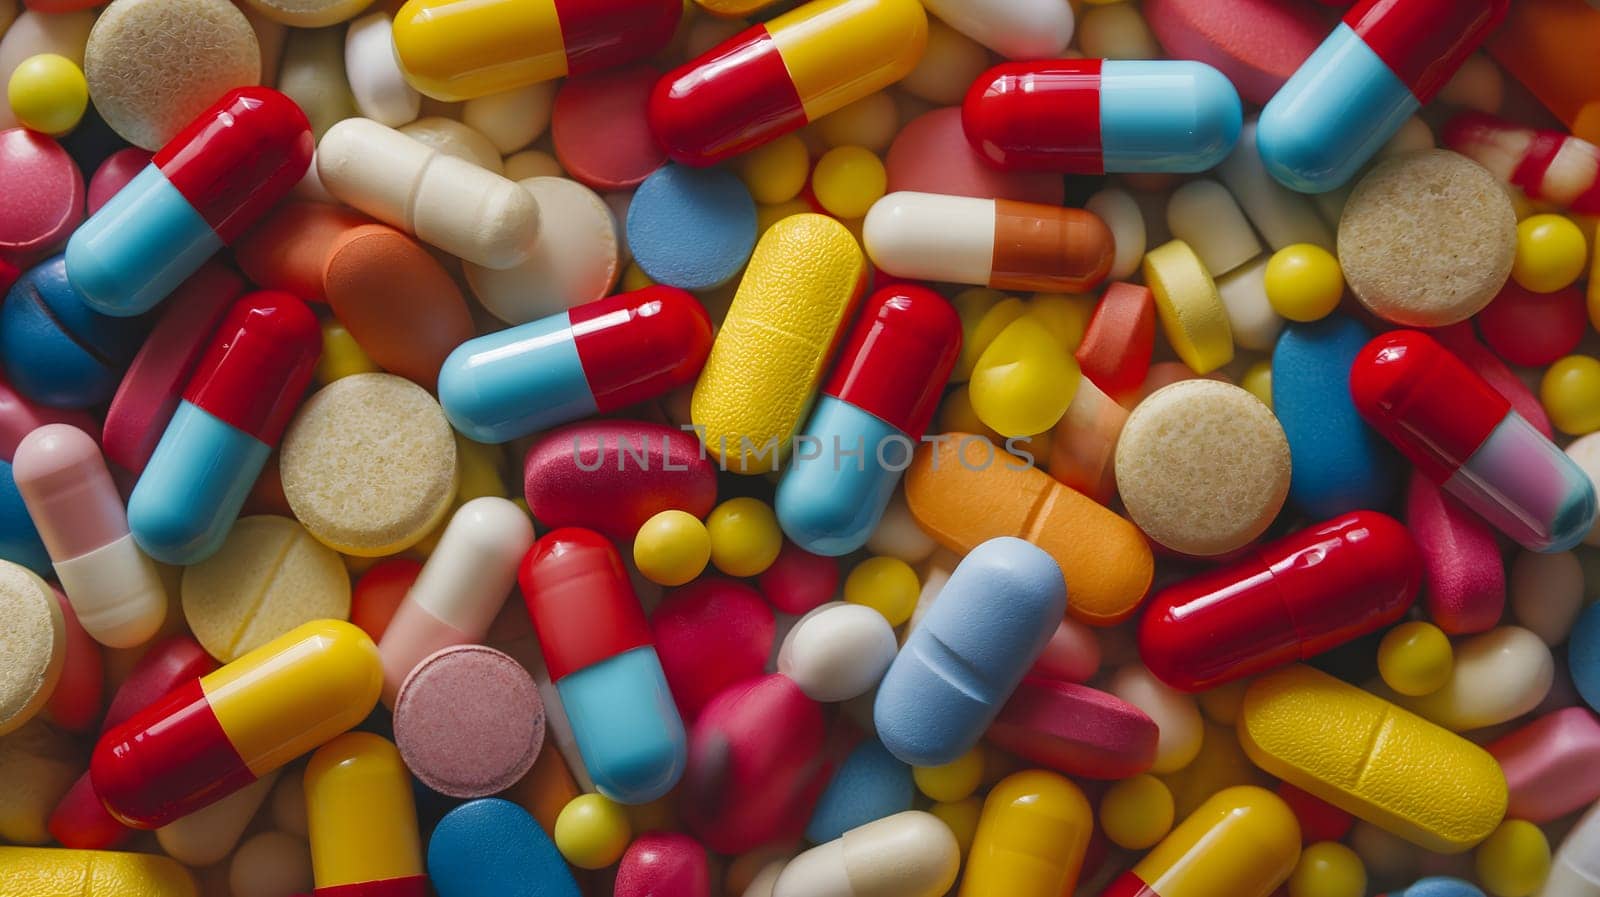 Pile of different medical pills, full-frame background. Neural network generated image. Not based on any actual scene or pattern.